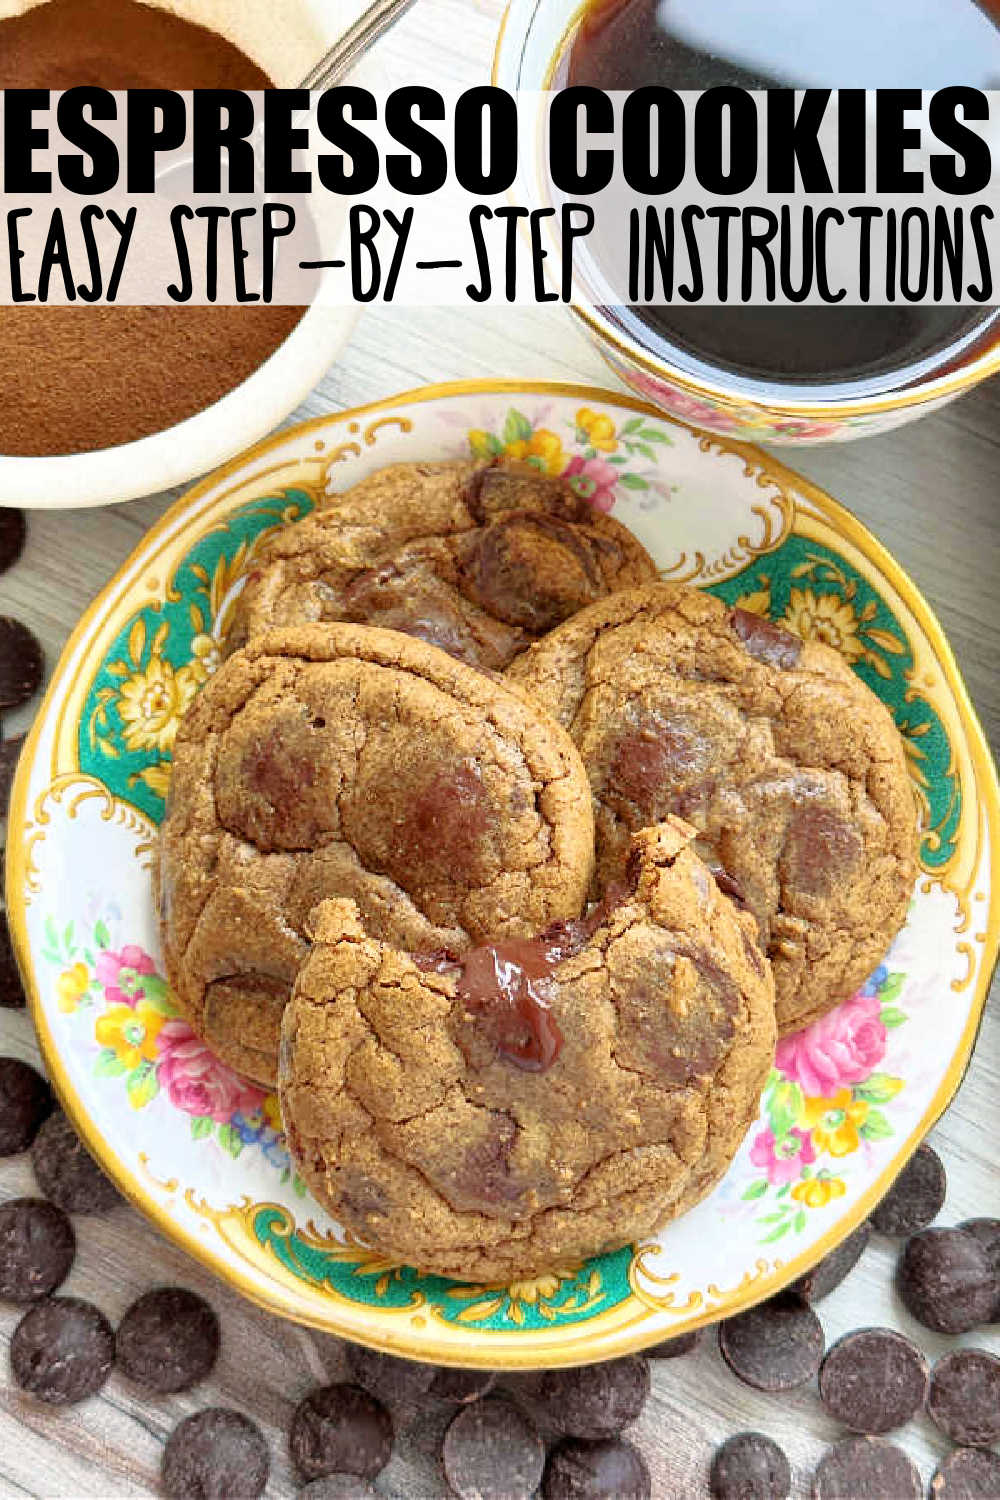 These espresso cookies intensify the taste of and add an air of sophistication to a classic chocolate chip cookie recipe with the addition of espresso powder. via @foodtasticmom